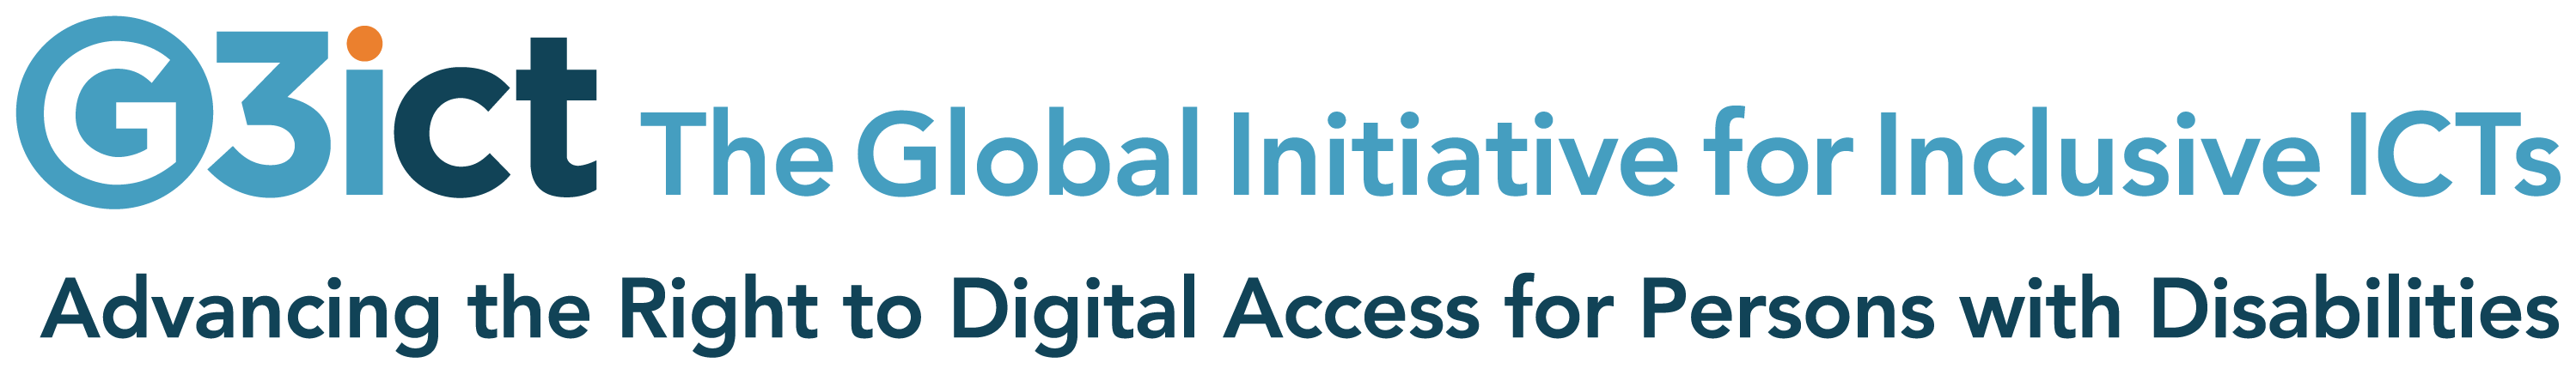 G3ict, The Global Initiative for Inclusive ICTs Advancing the rights to digital access for pearson with Disabilities